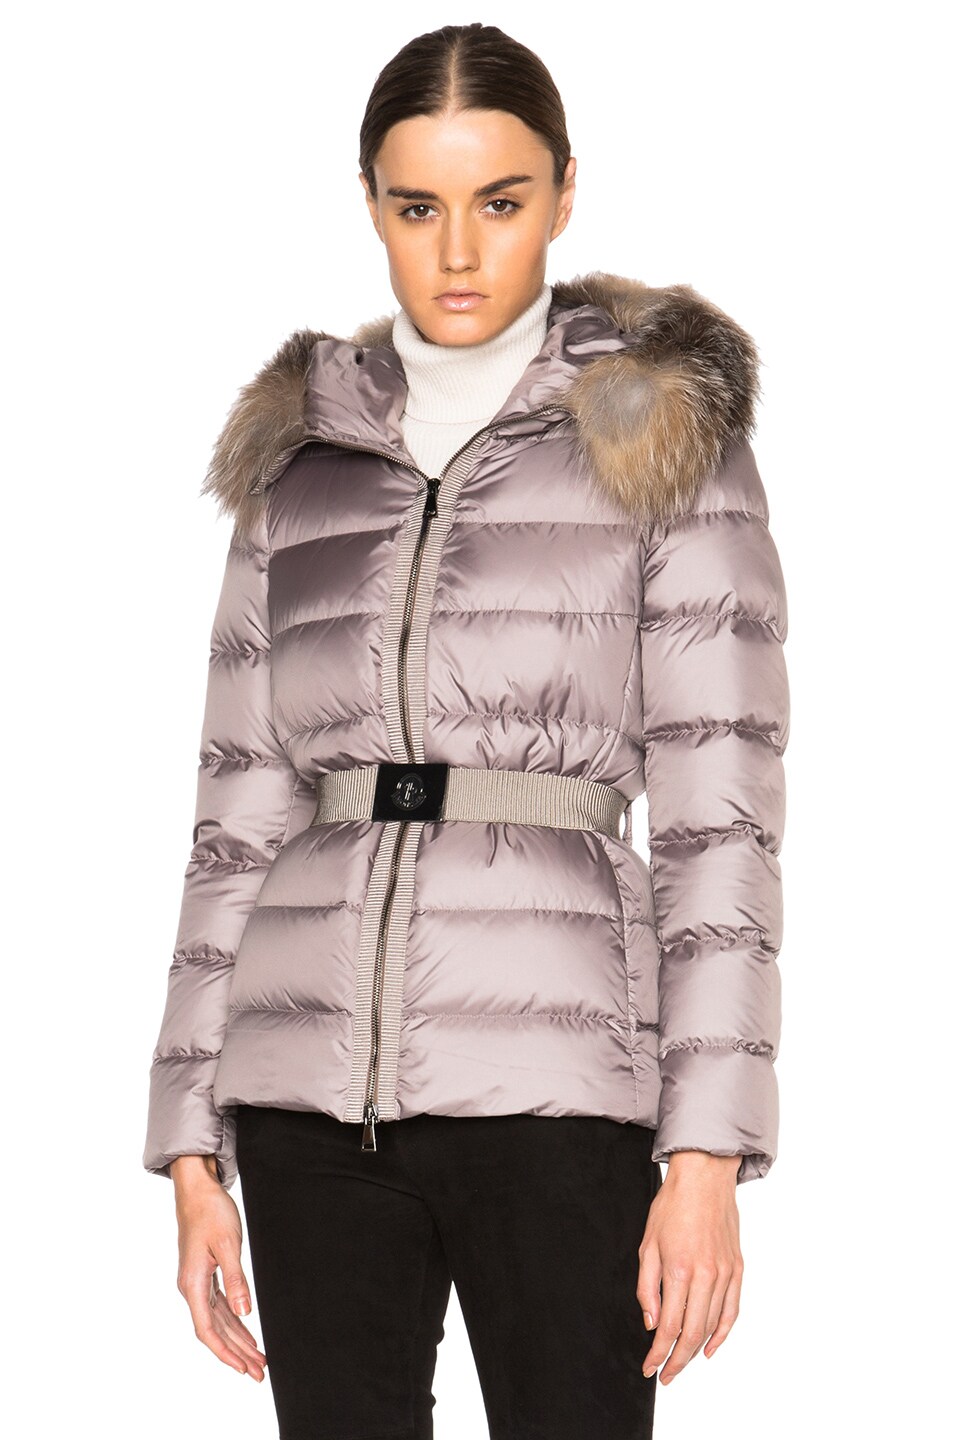 Moncler Fabrette Short Jacket with Fox Fur Hood in Taupe | FWRD